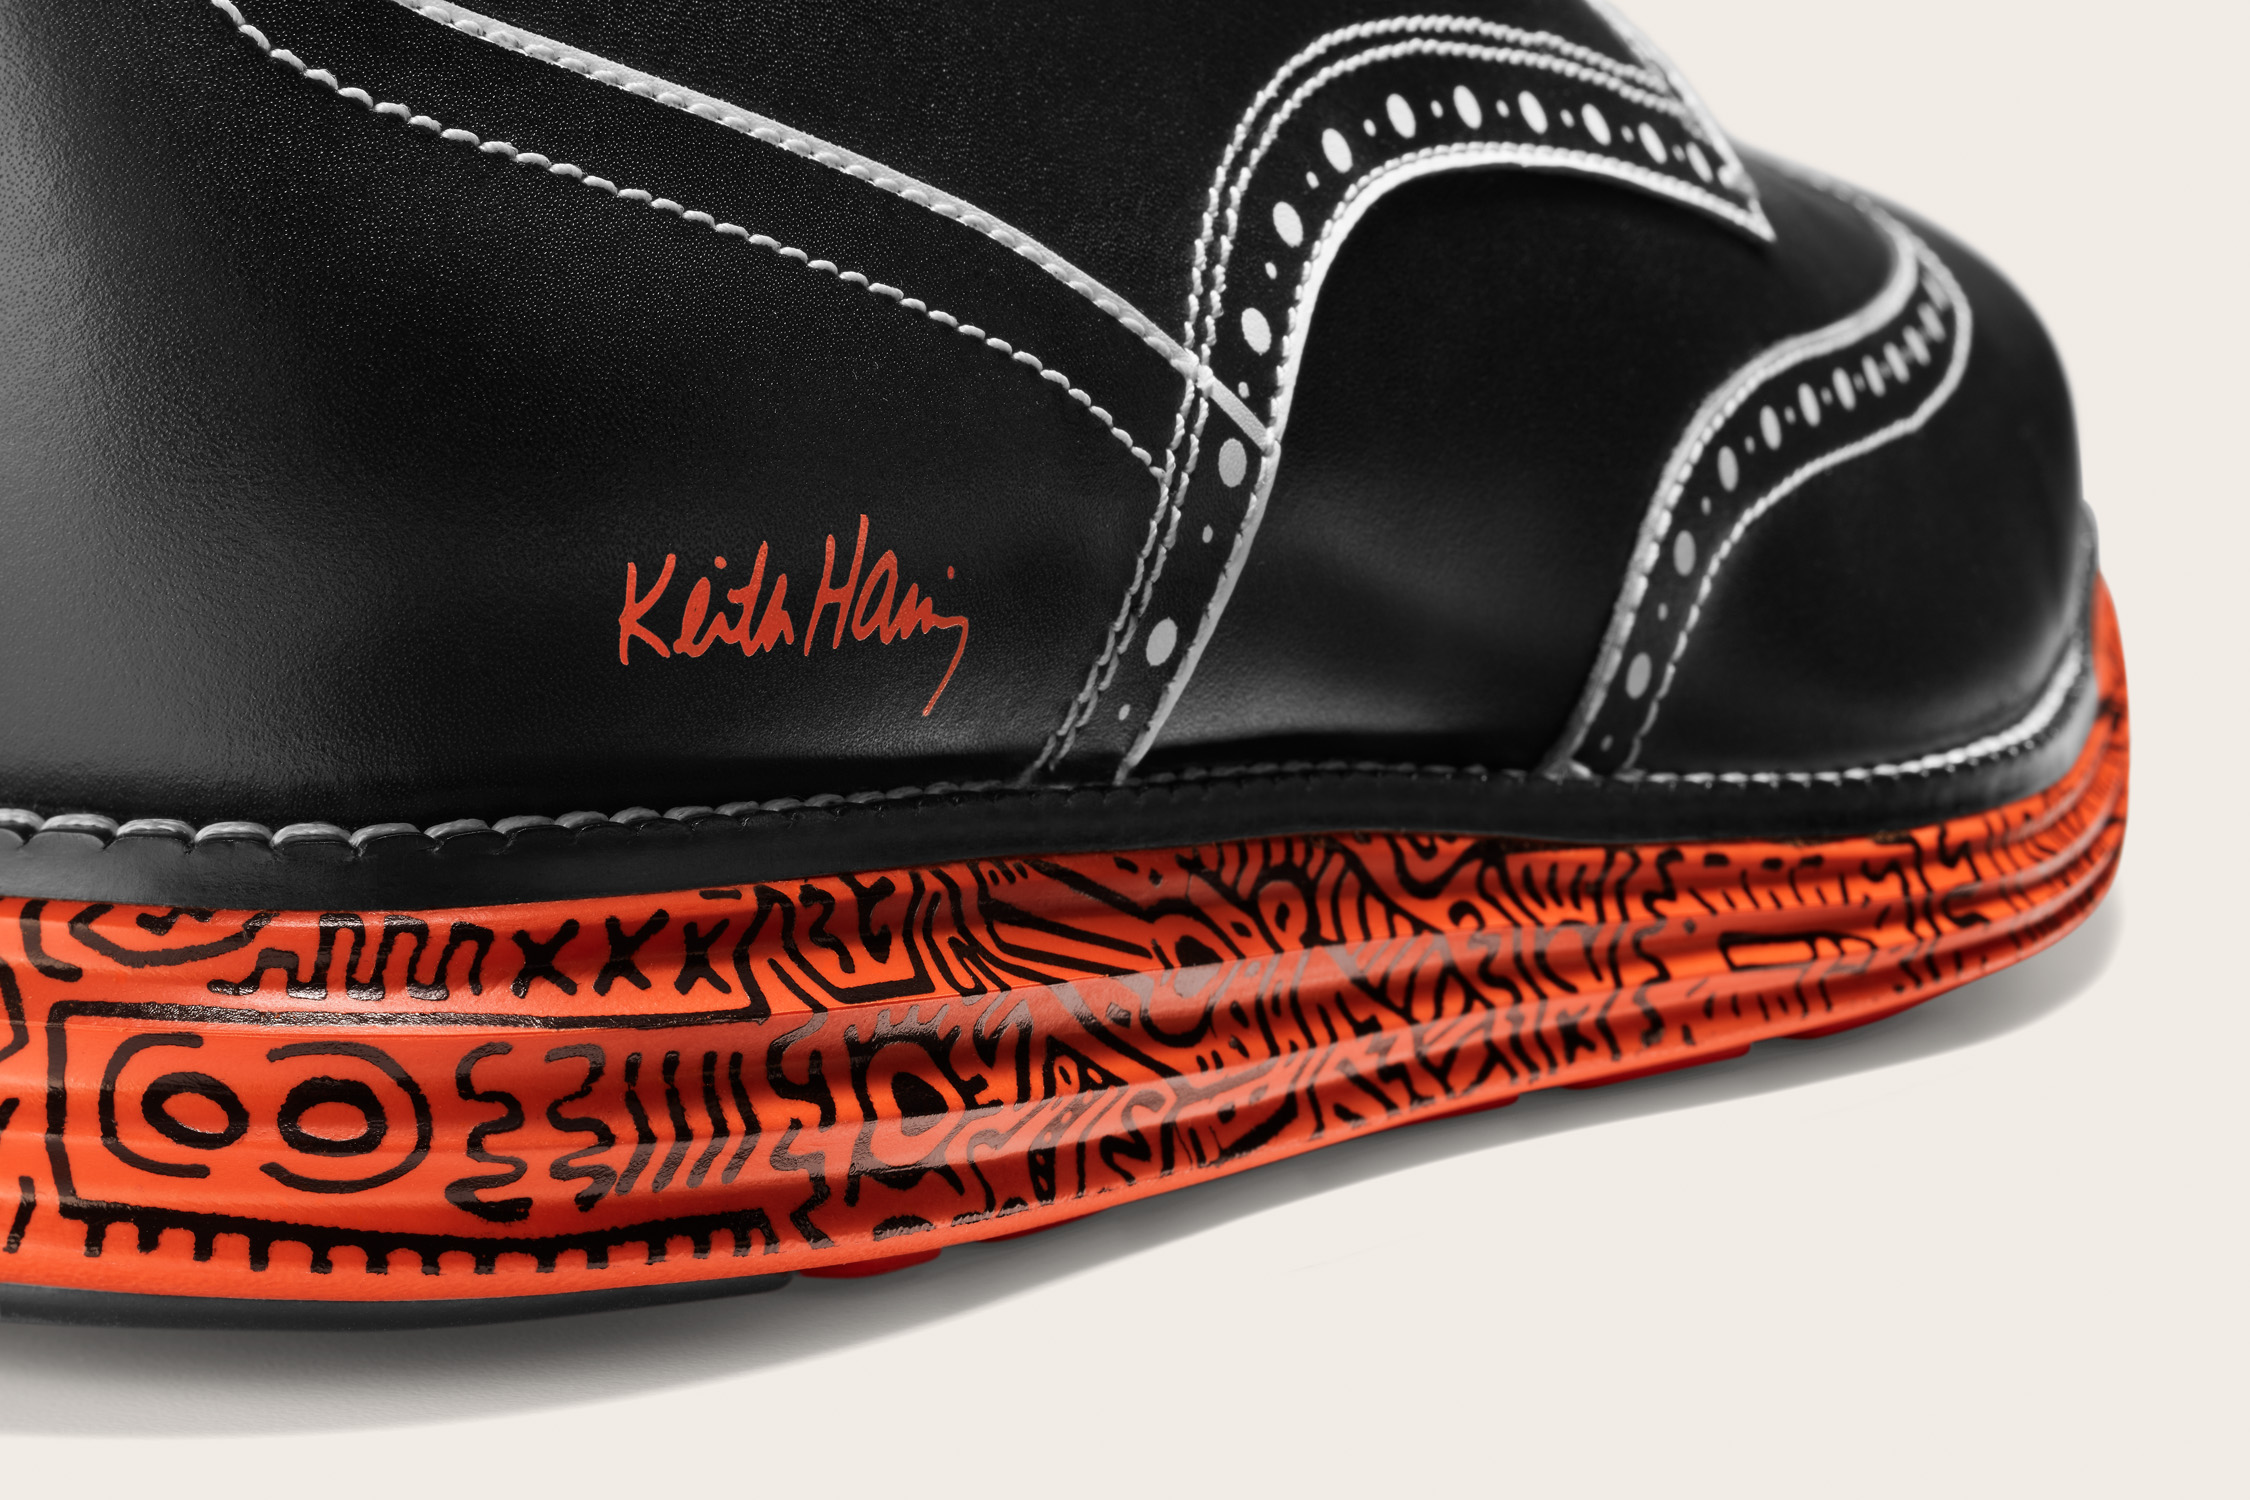 Cole Haan Unveils New Shoe Collaboration Featuring The Art Of Keith Haring